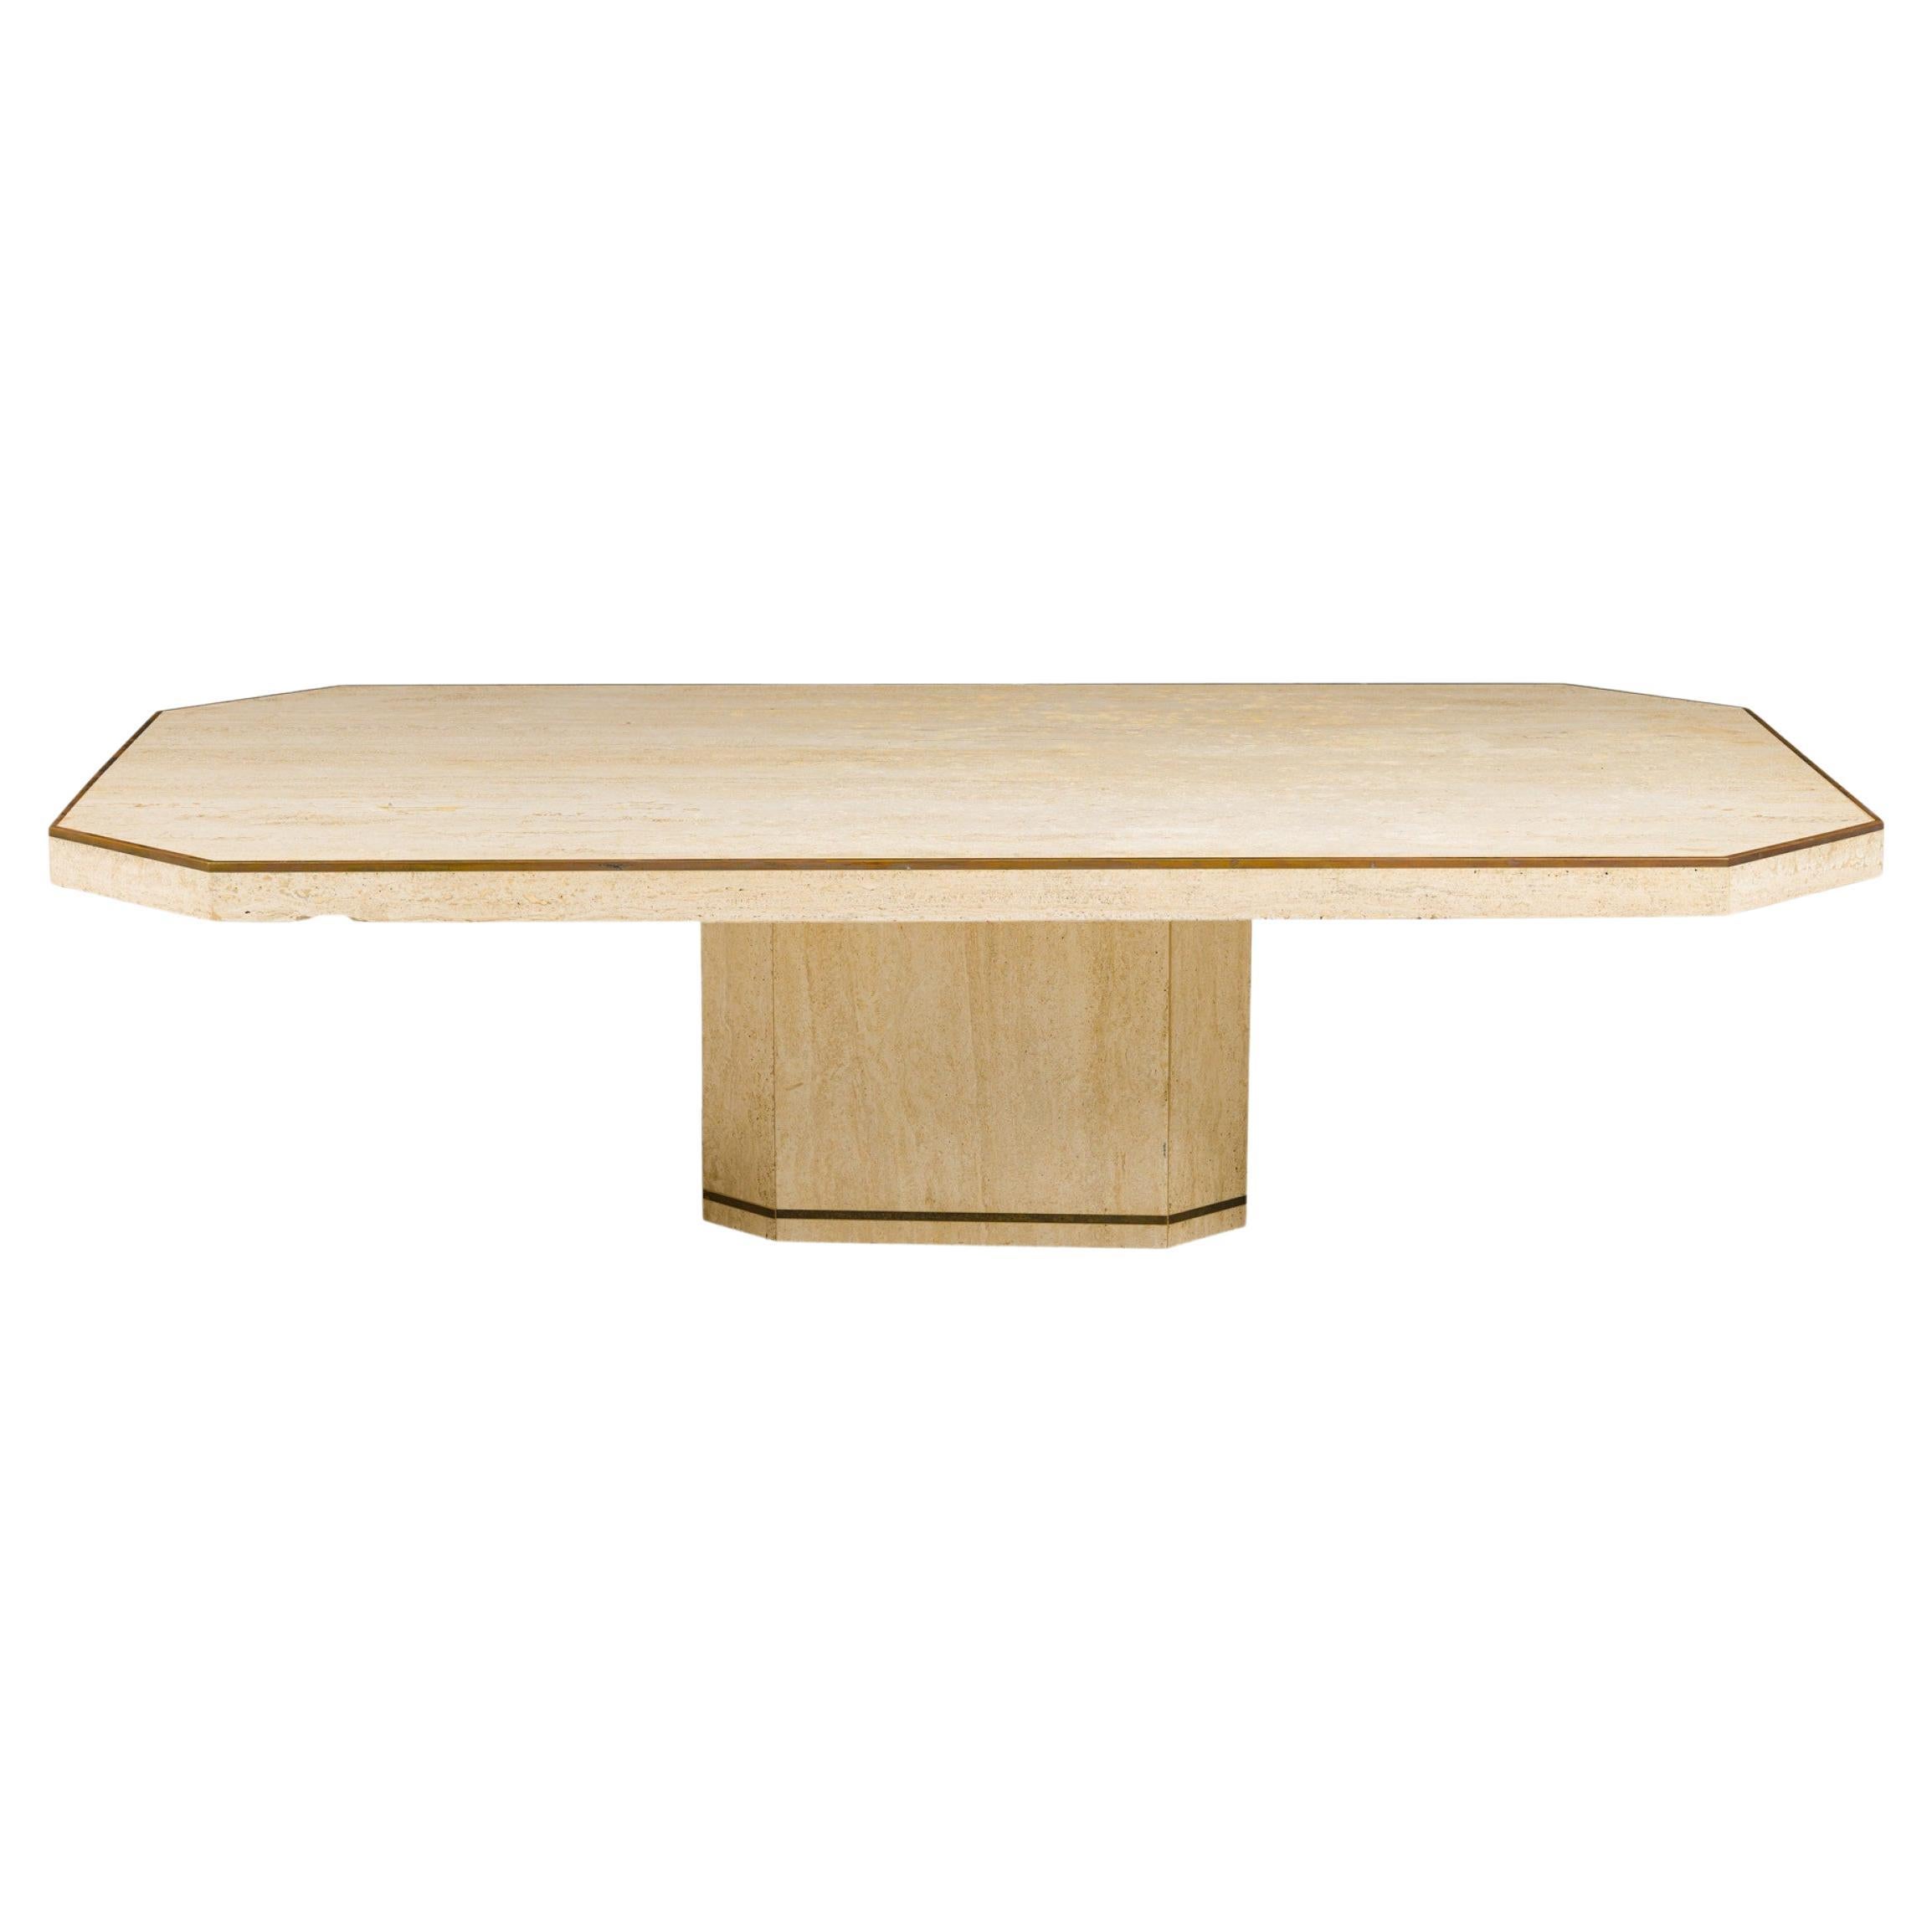 Willy Rizzo for Jean Charles Italian Monumental Travertine Marble Coffee Table